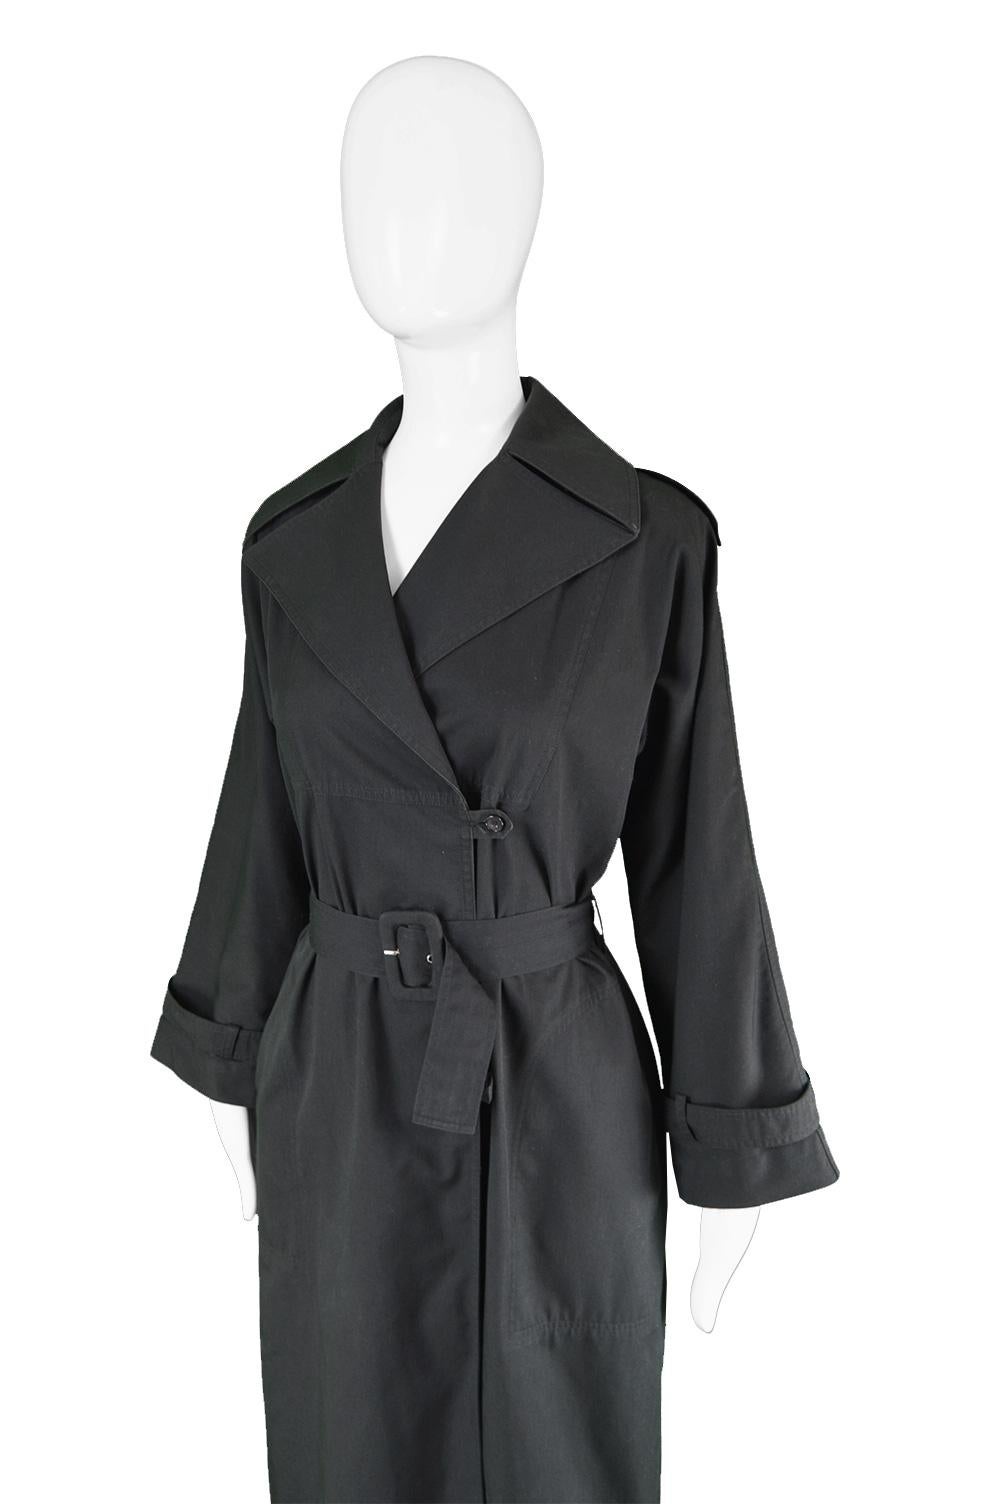 Guy Laroche Vintage Minimalist Women's Black Cotton Trench Coat, 1980s In Excellent Condition For Sale In Doncaster, South Yorkshire